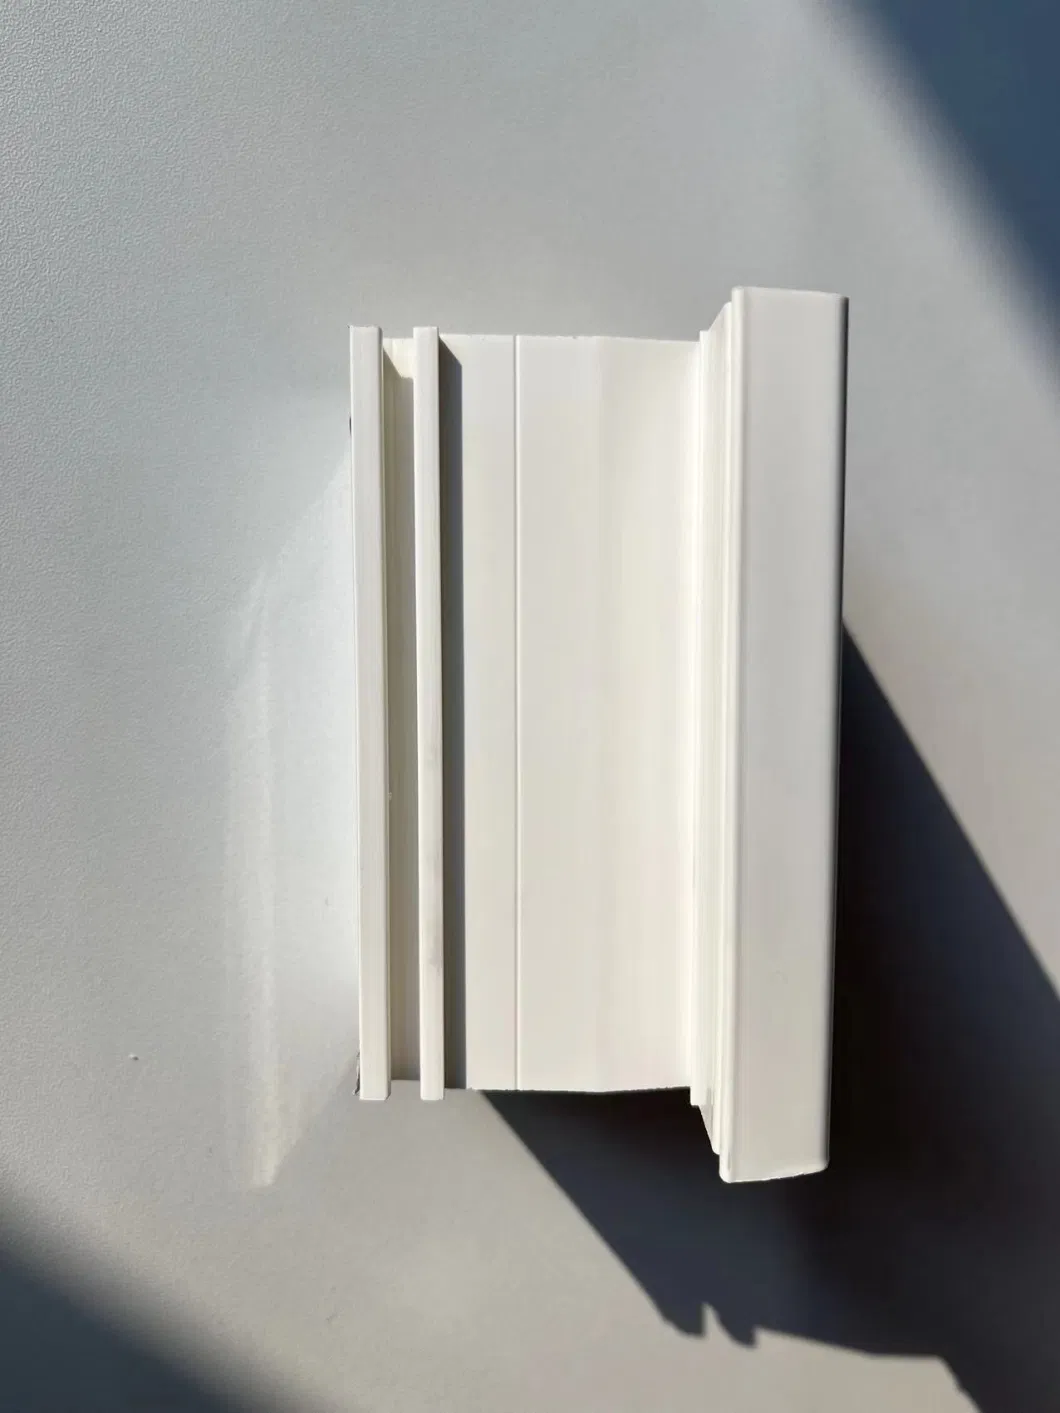 Gkbm Greenpy 60 Solid White UPVC Profiles for Casement Window and Door